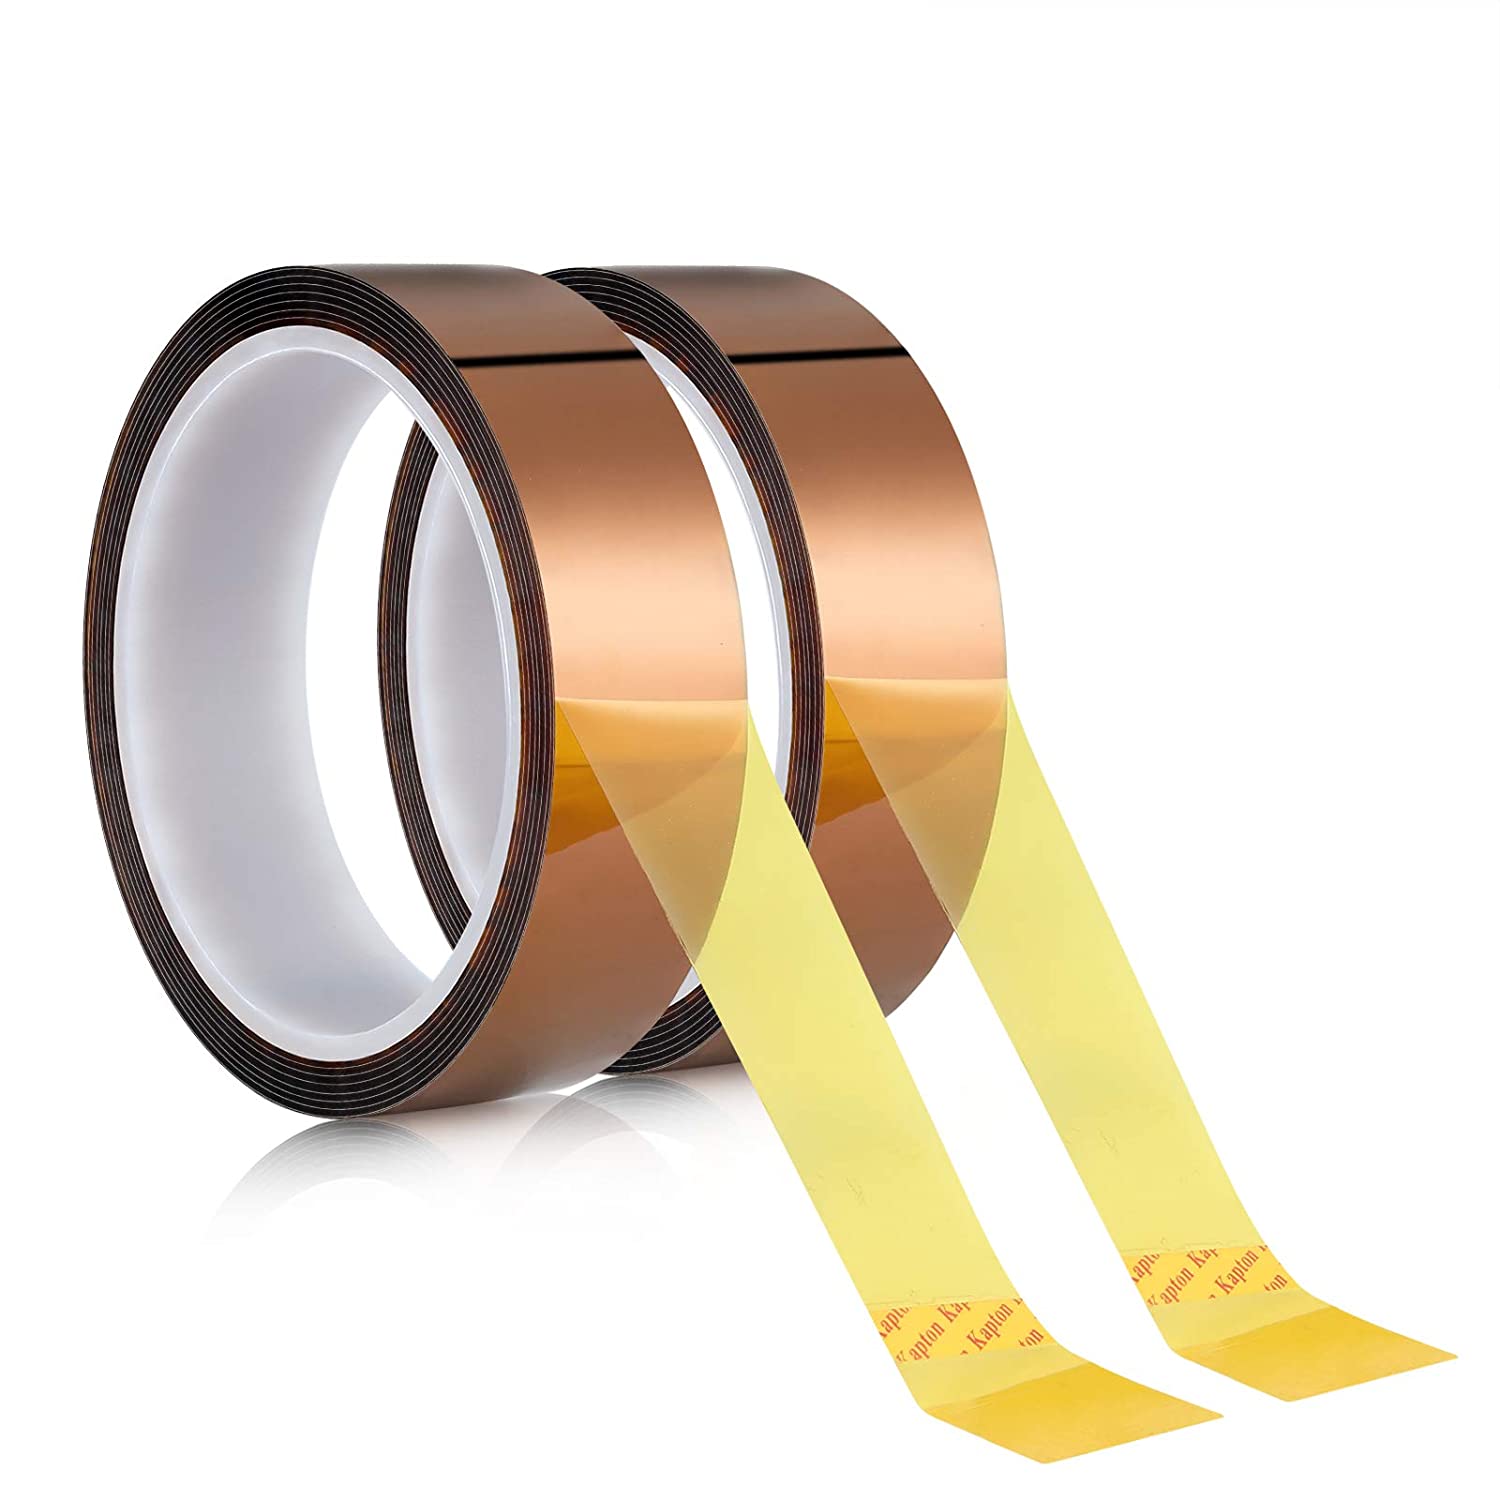 CoYlBod Kapton Tape High Temperature Tape 1（25.4mm） X 36 Yds, Kapton No  Residue Heat Tape for Sublimation and Heat Transfer, Masking, 3D Printing